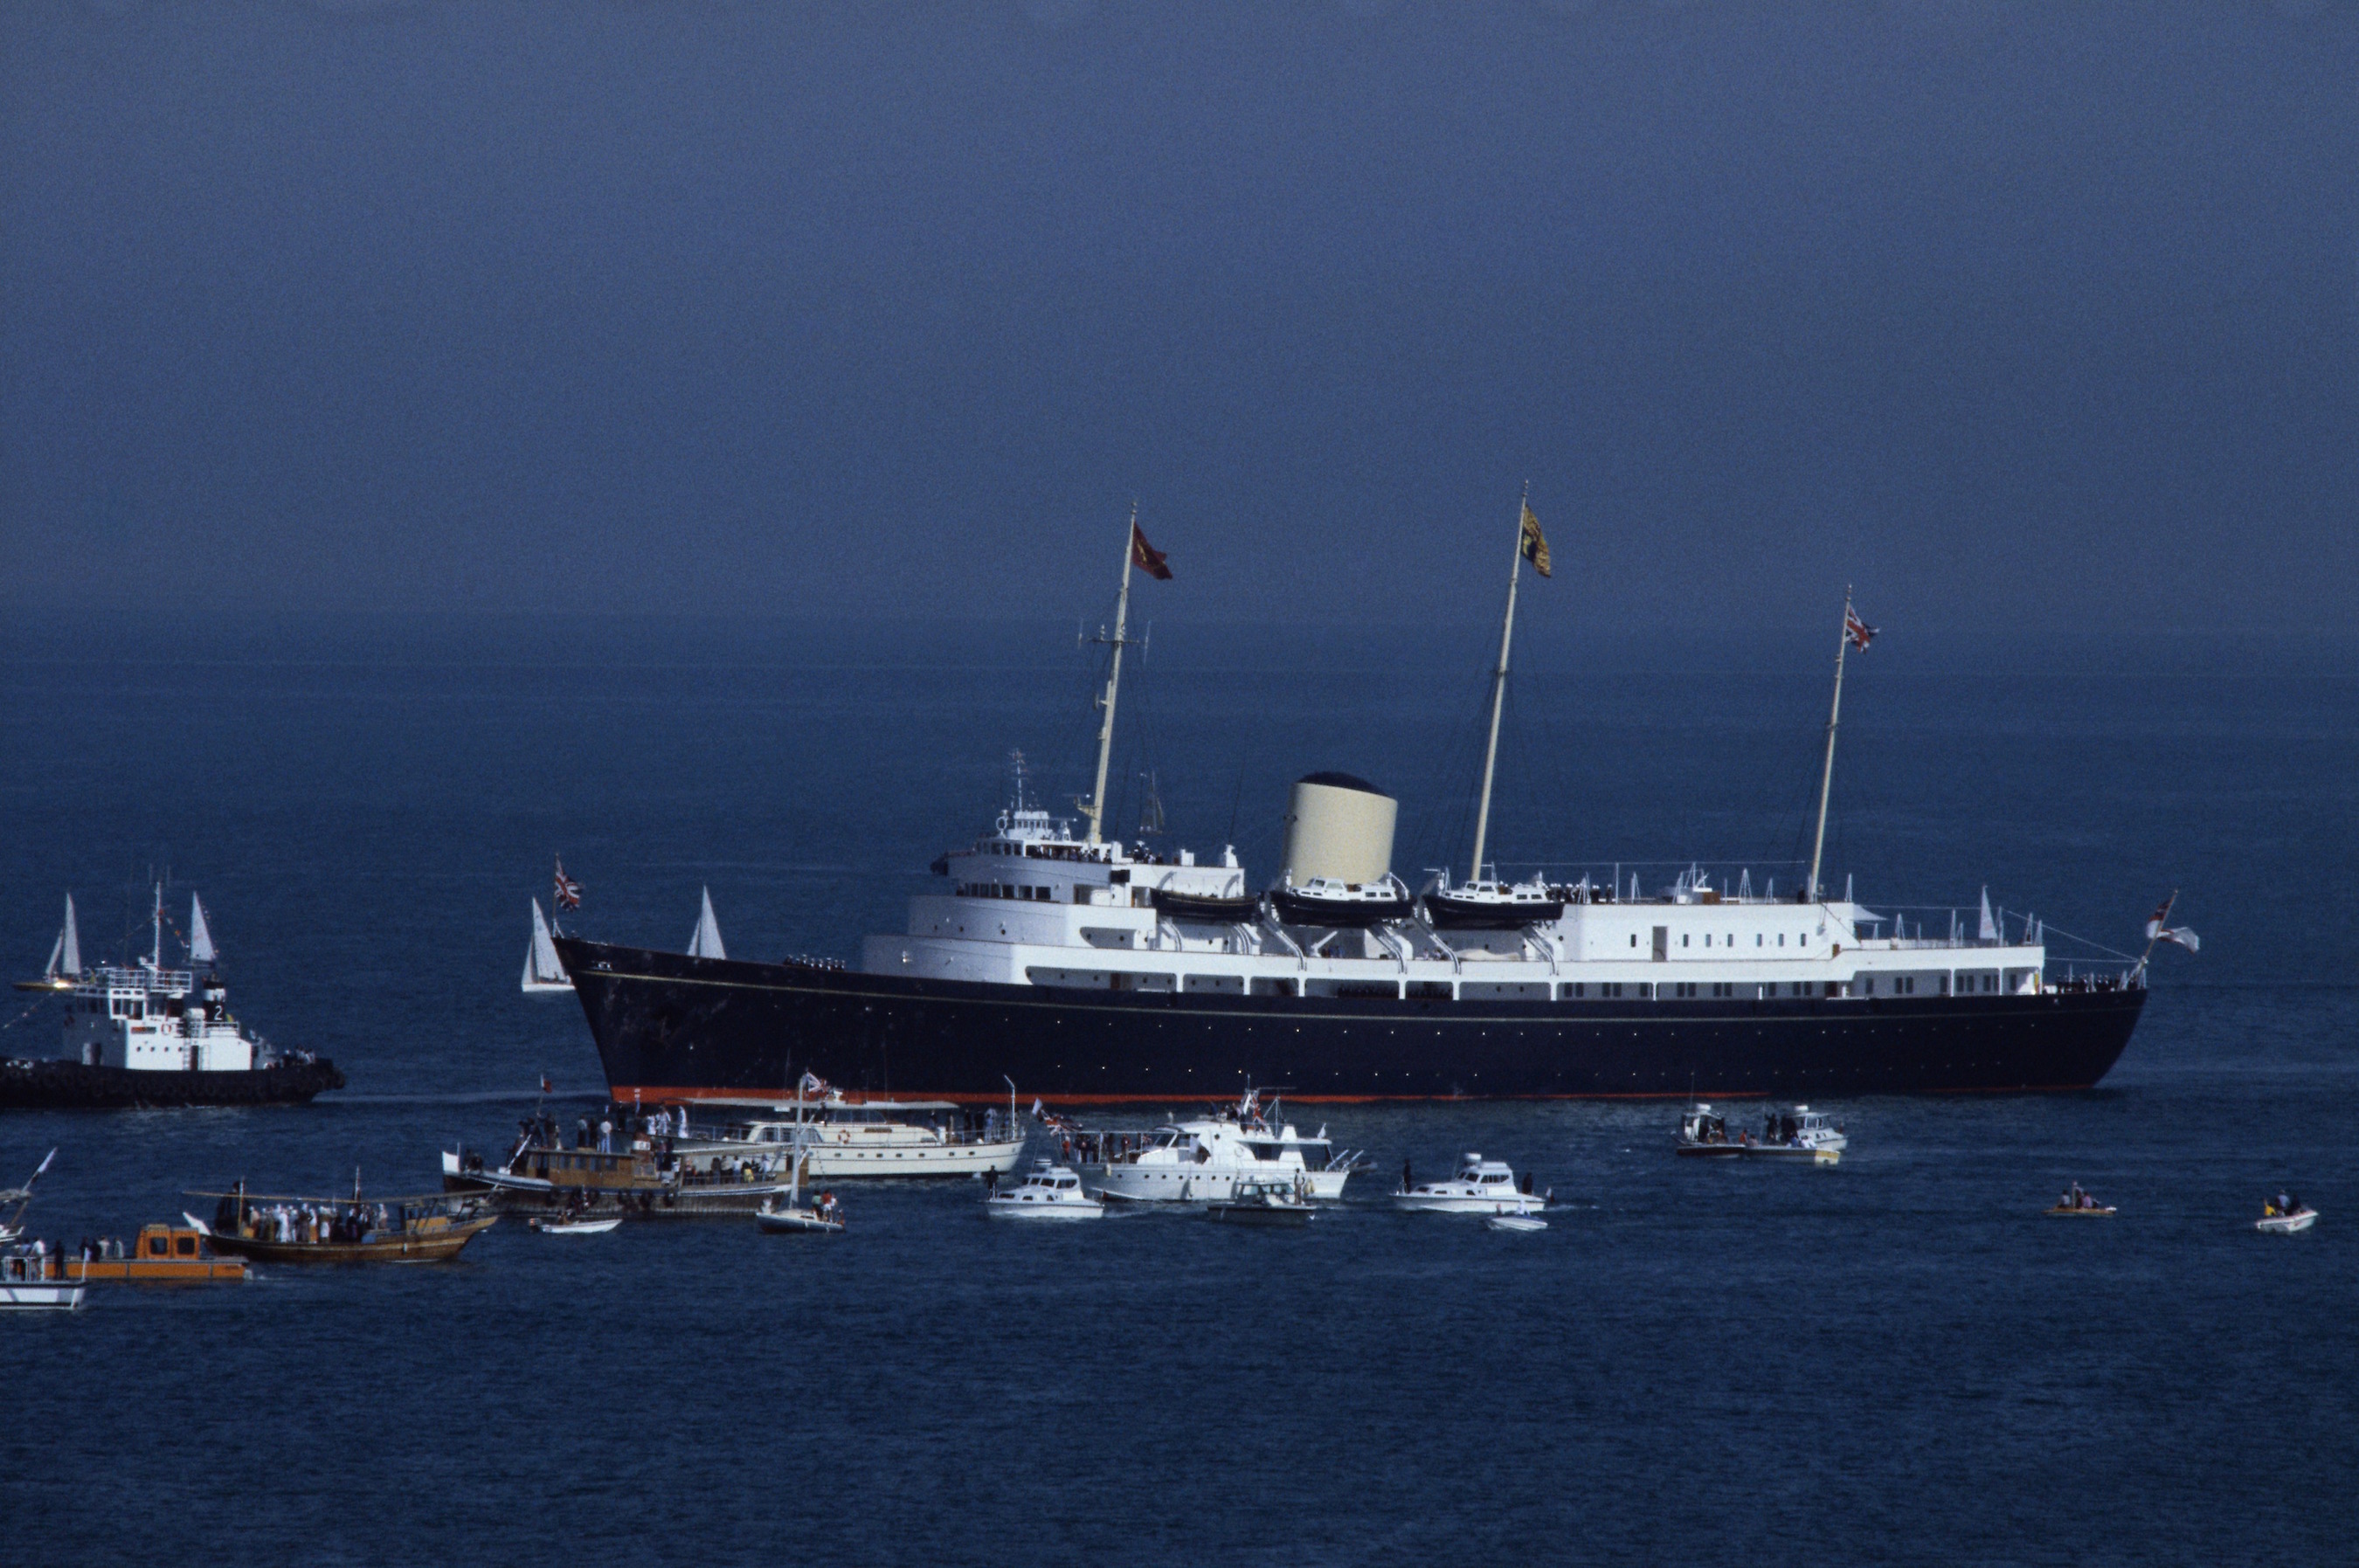 history of the royal yacht